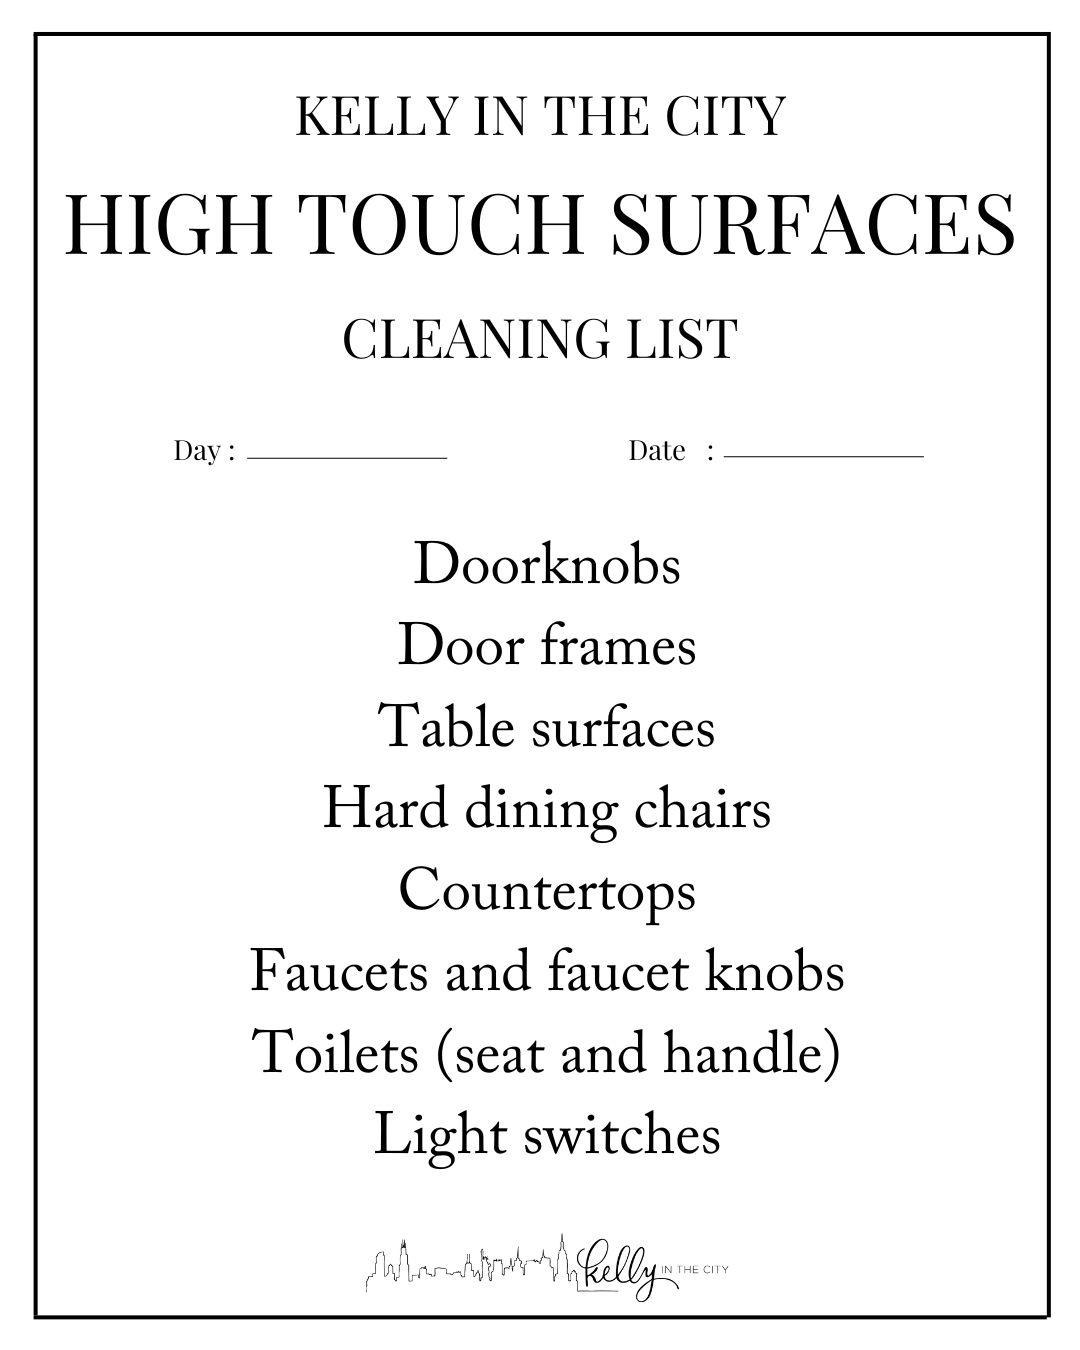 kelly in the city high touch surface cleaning list